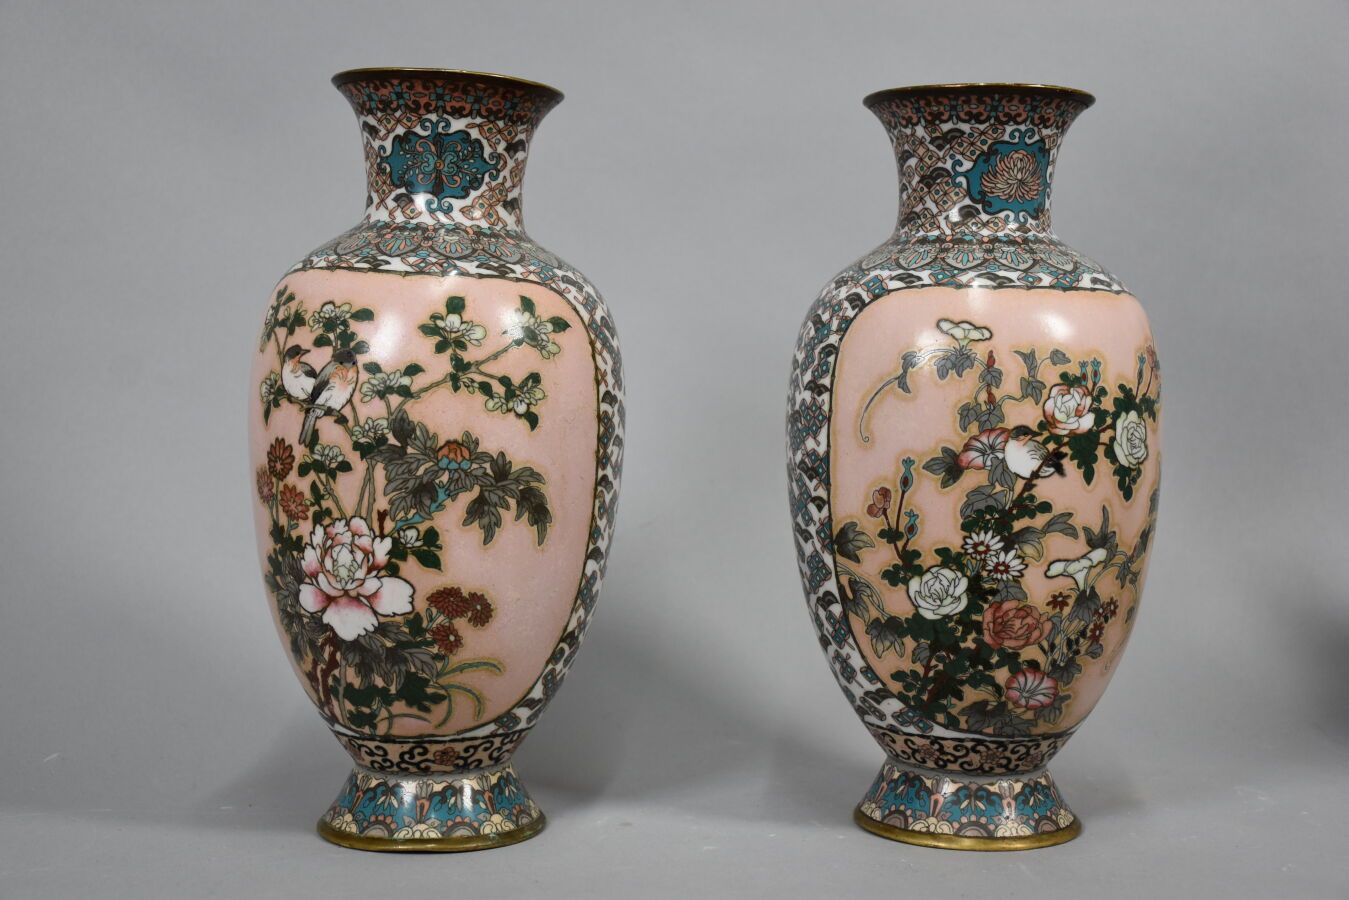 Null Japan

Pair of cloisonné vases, baluster shape, decorated with birds in fli&hellip;